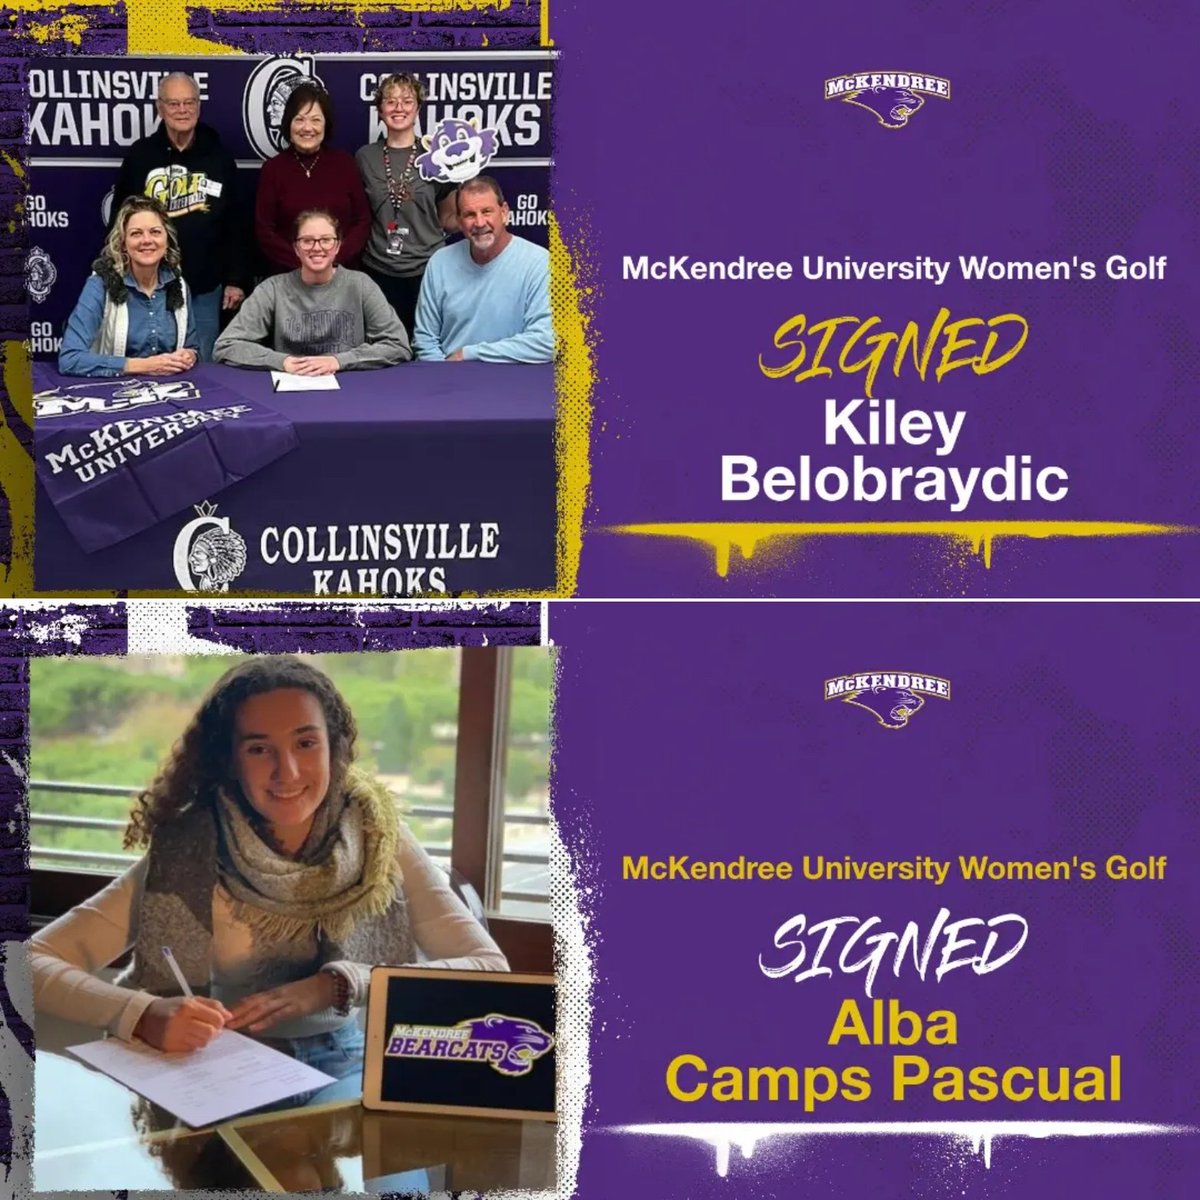 Excited to welcome Kiley and Alba to McKendree Golf!